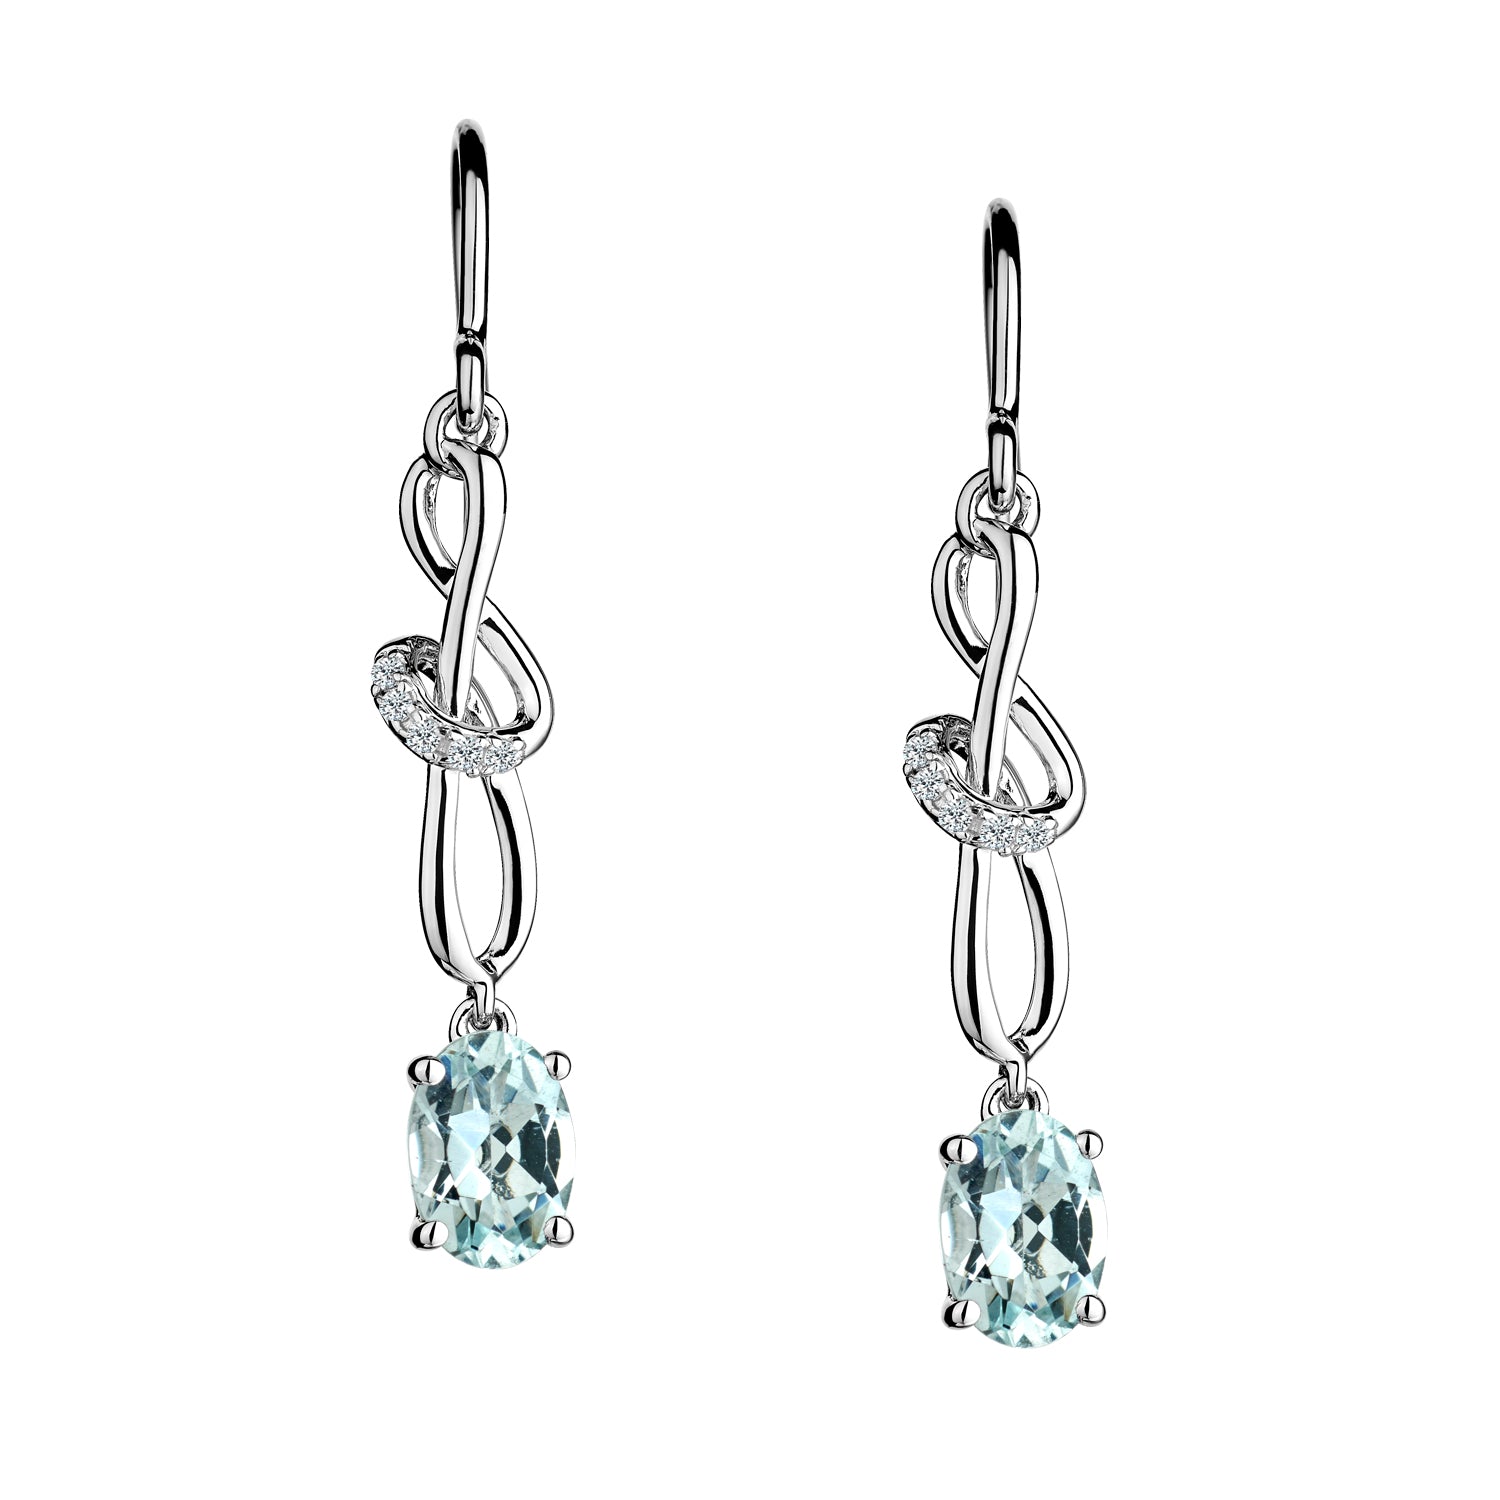 Genuine Aquamarine and White Sapphire Drop Earrings,  Sterling Silver. Griffin Jewellery Designs